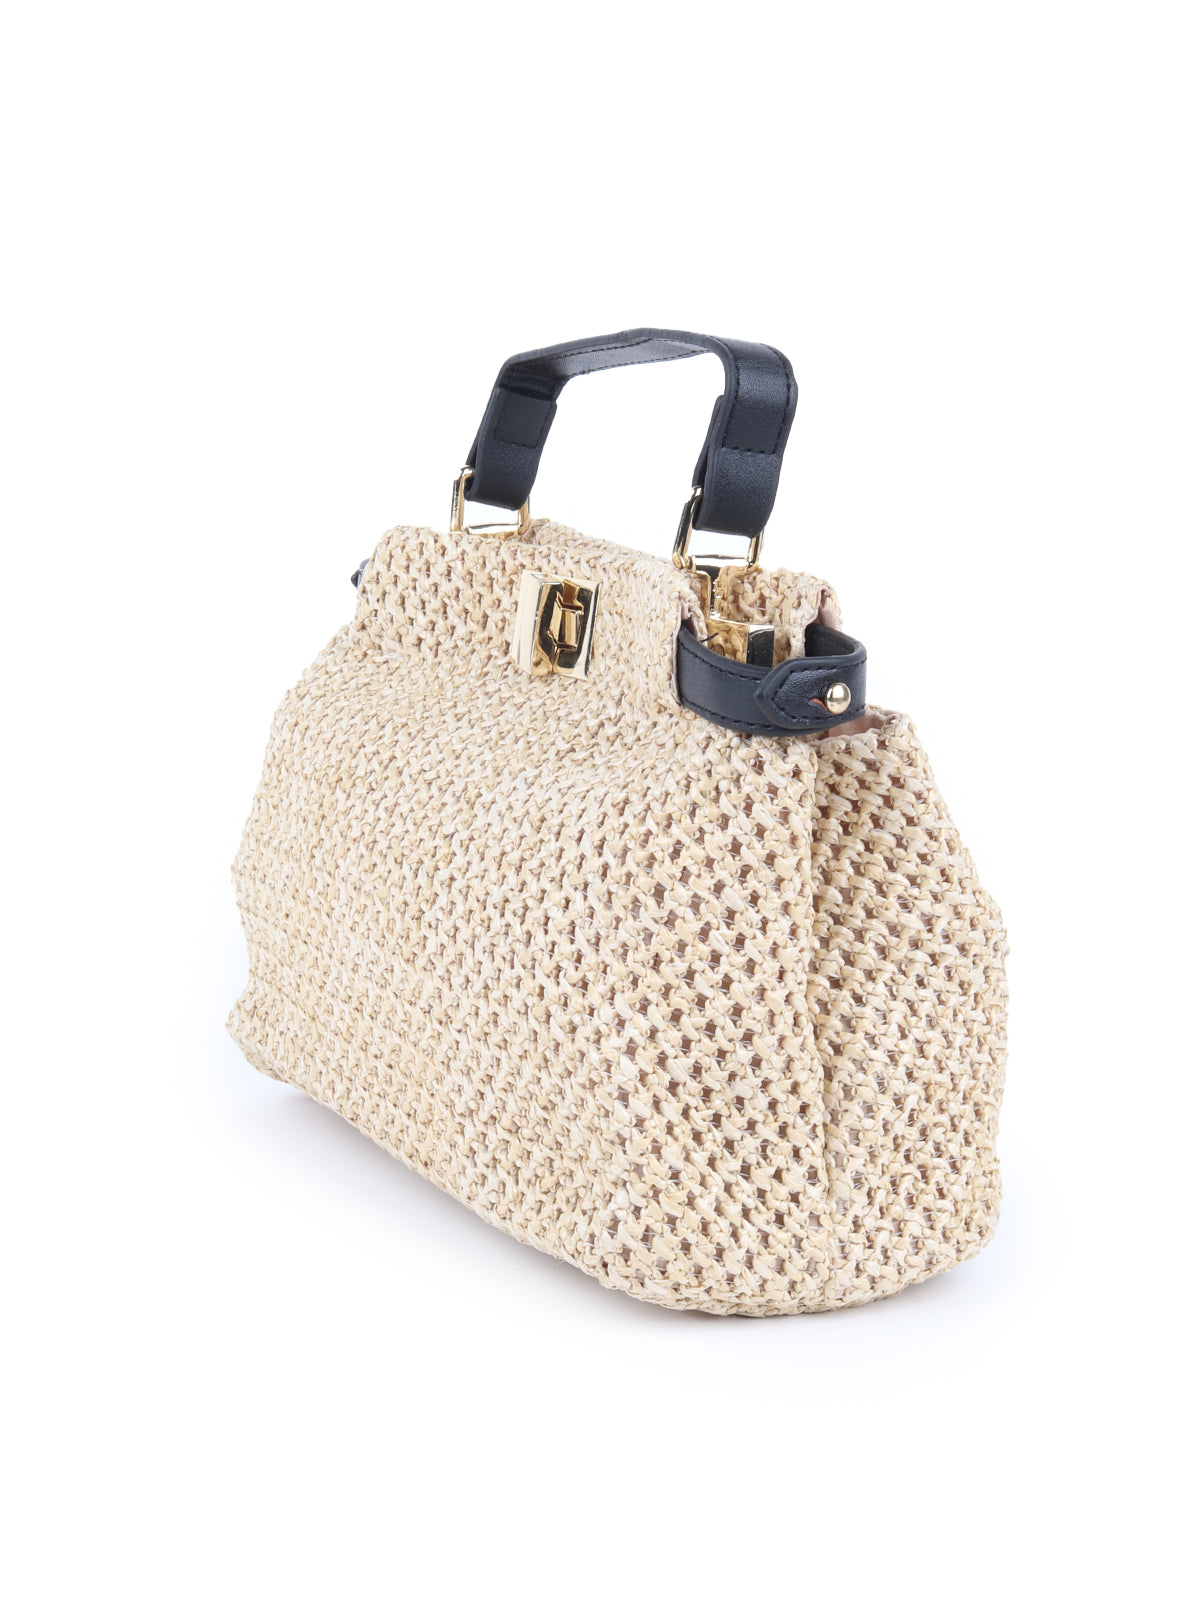 Odette Apricot Woven Clutch Bag For Women